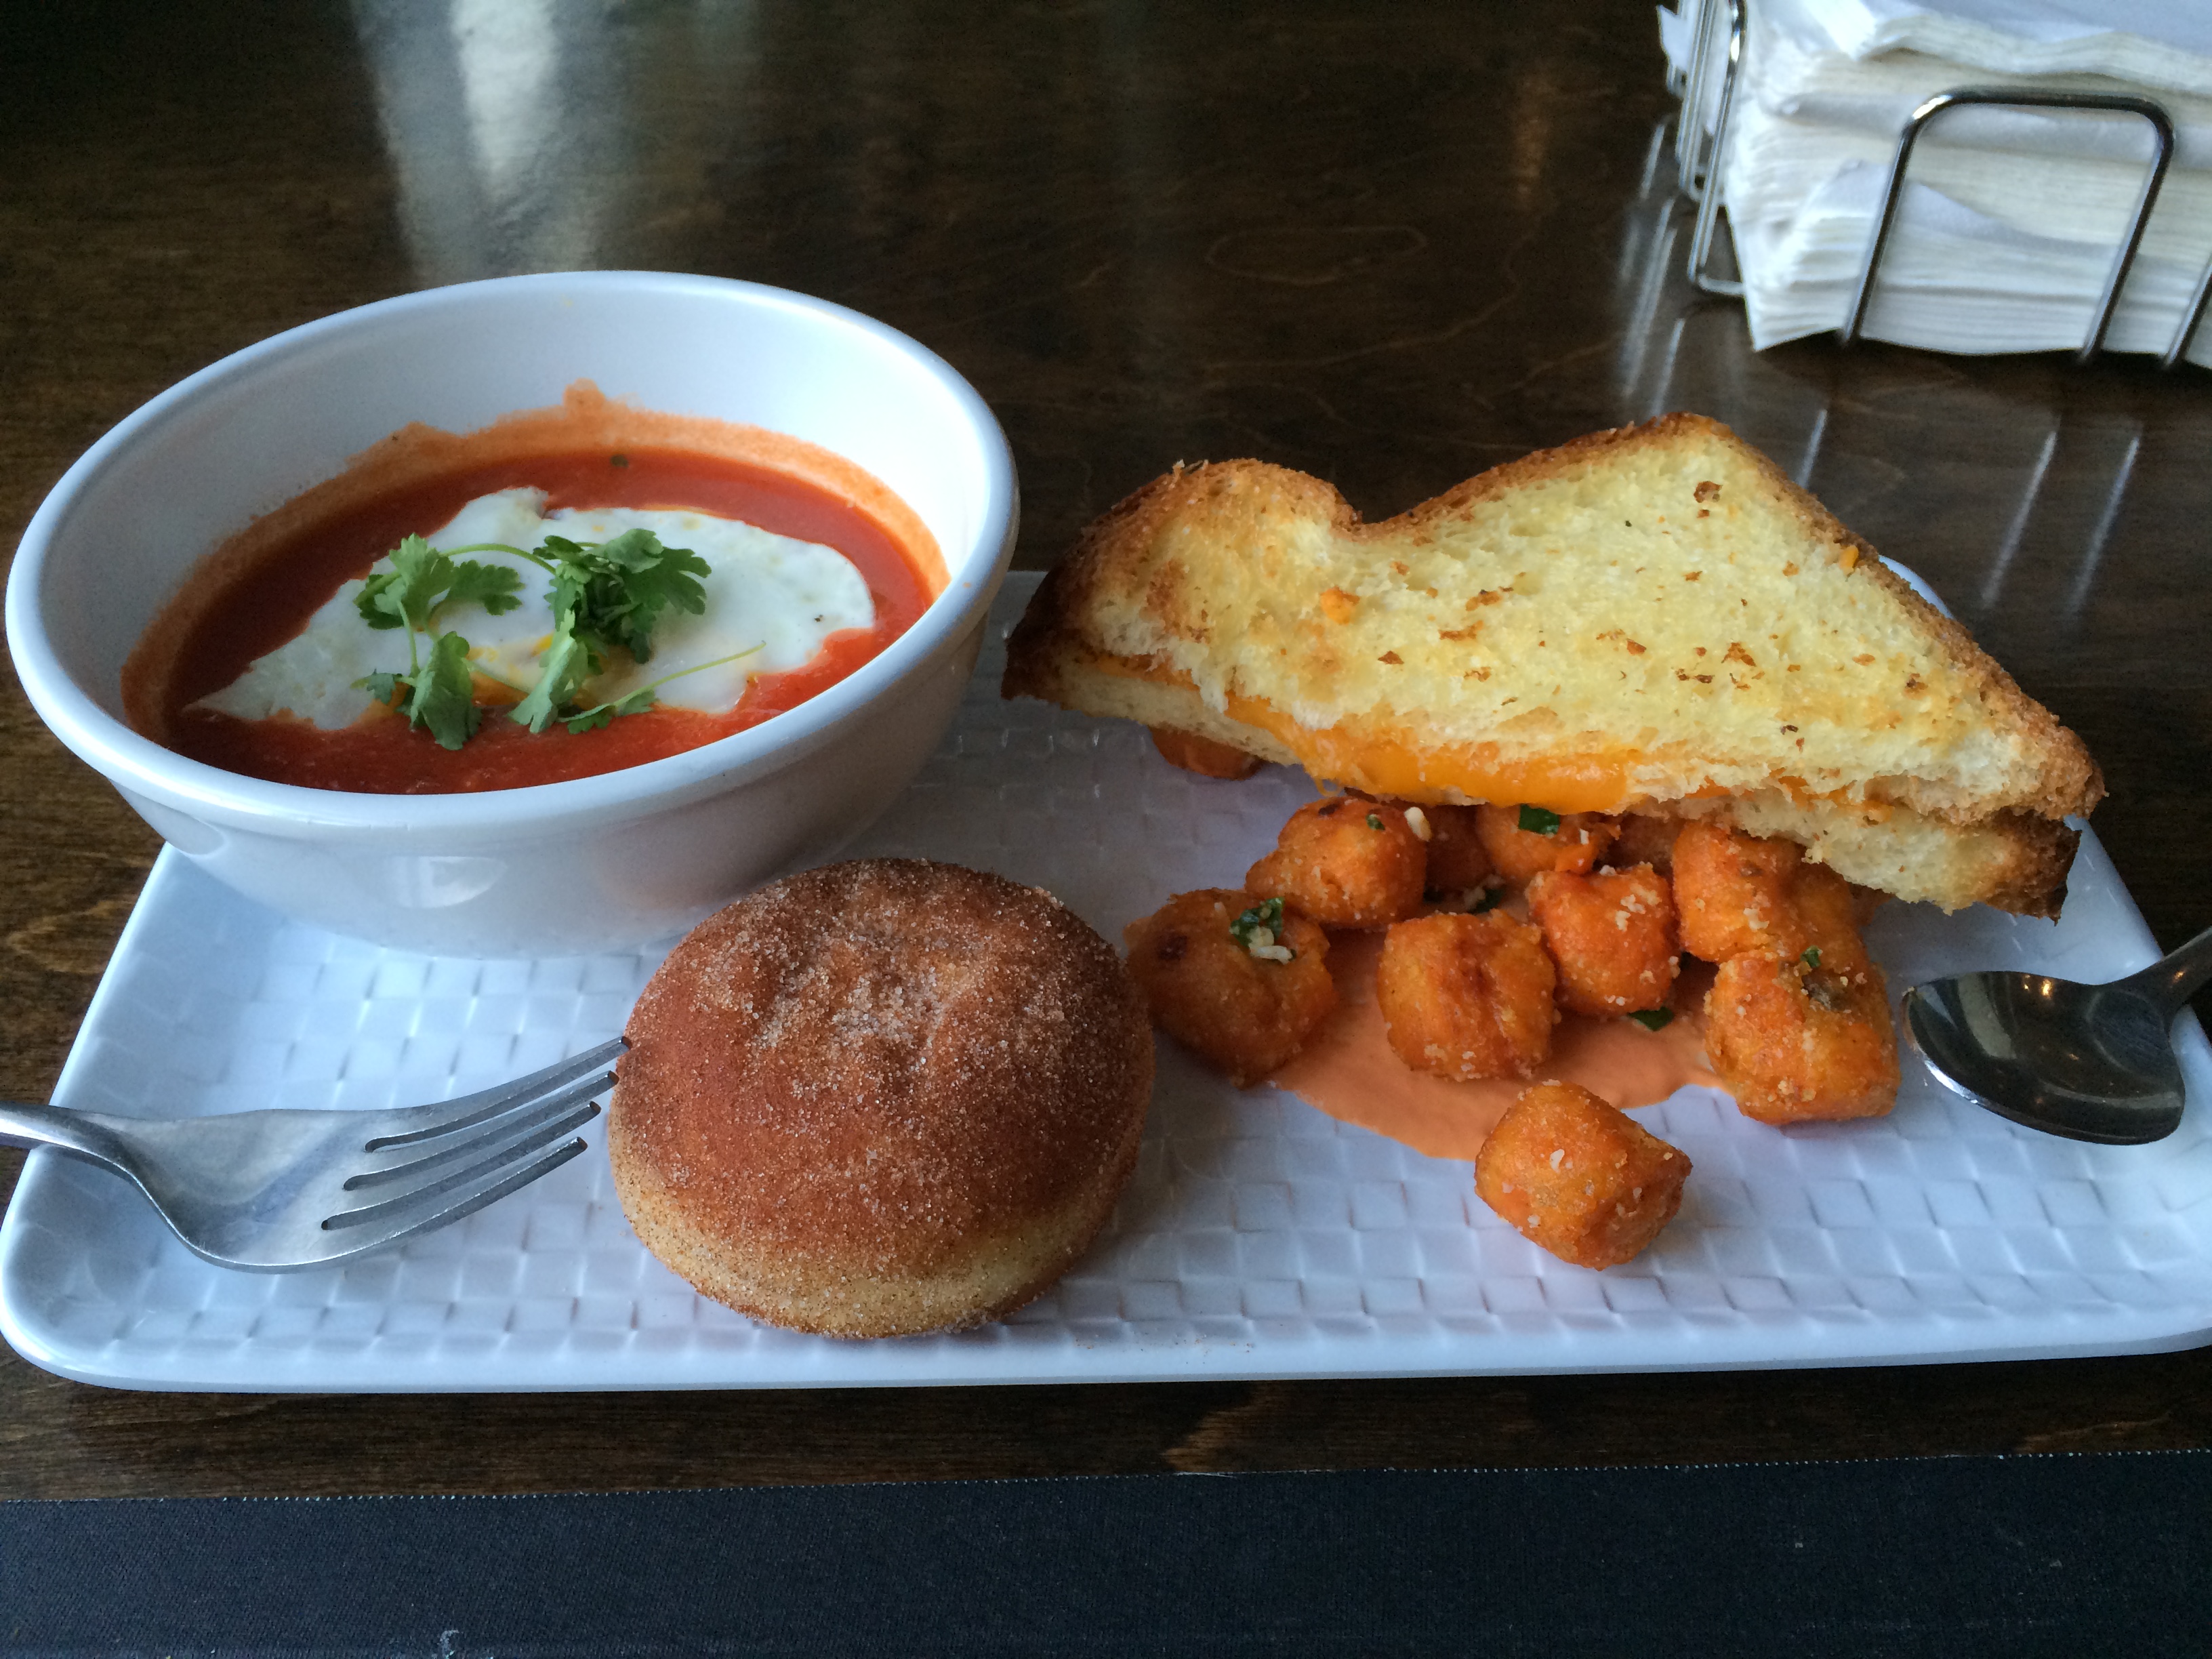 Grilled cheese with tomato soup and sweet potato tots